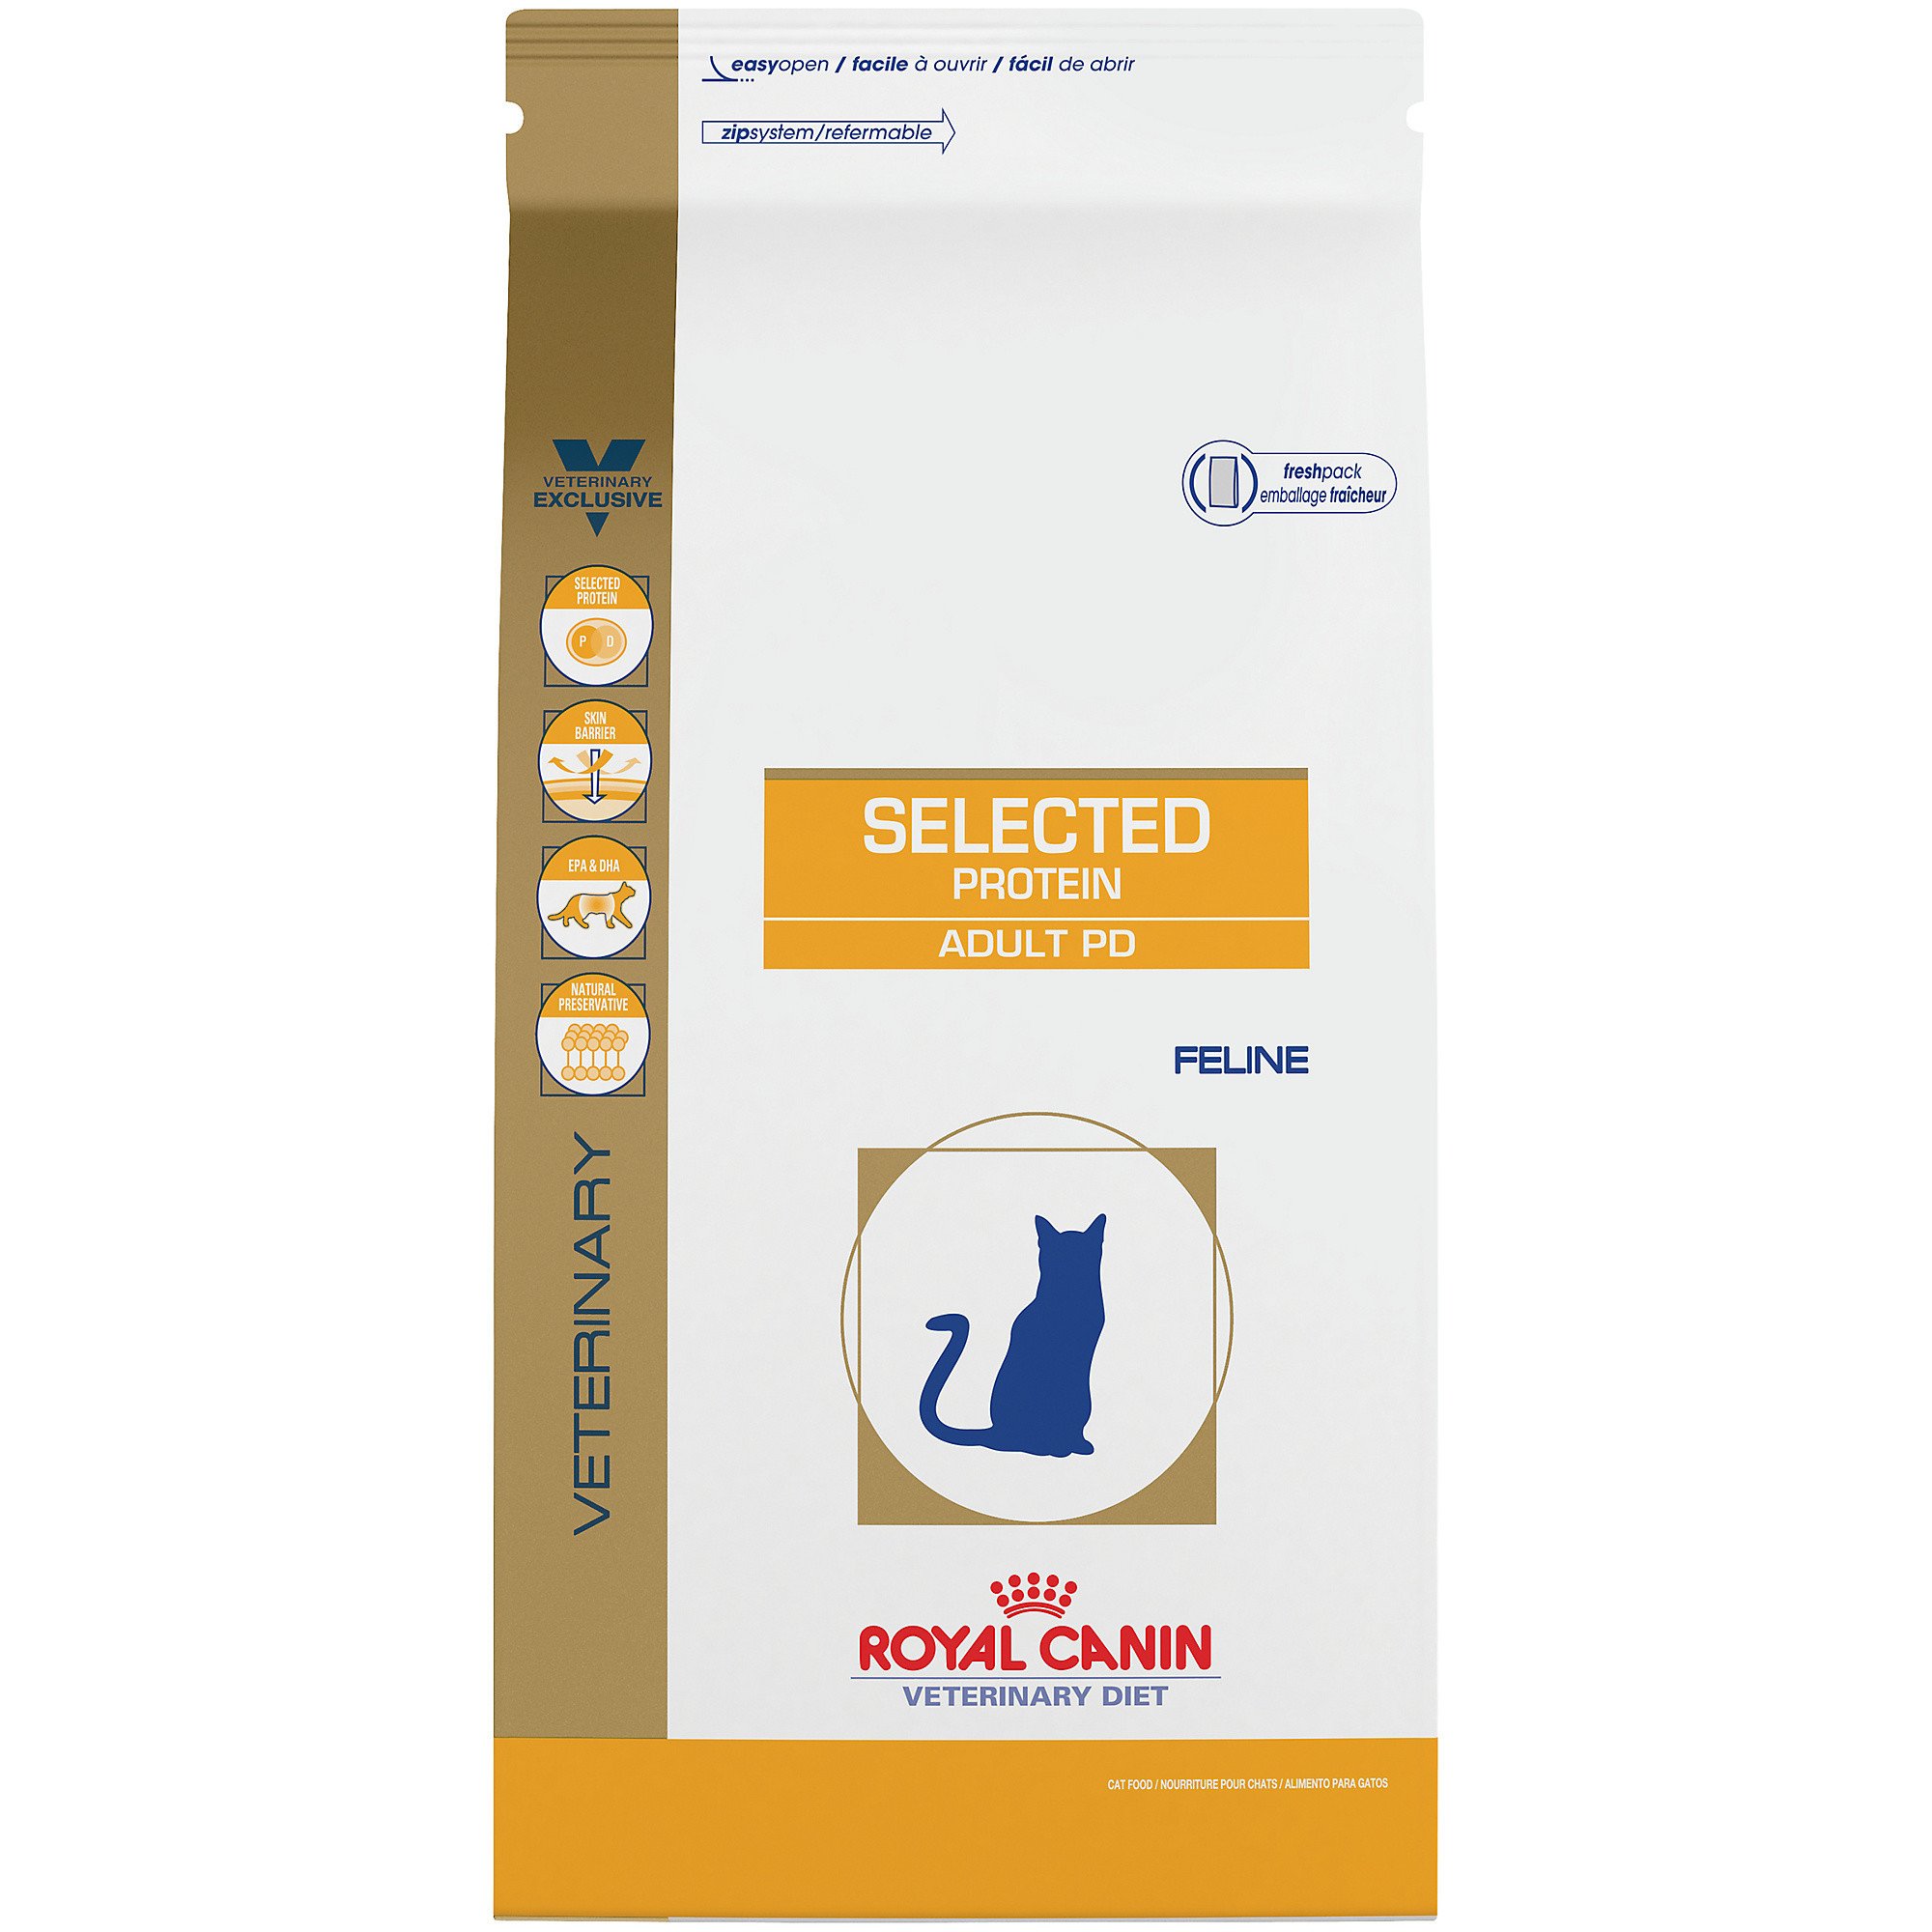 royal canin protein cat food